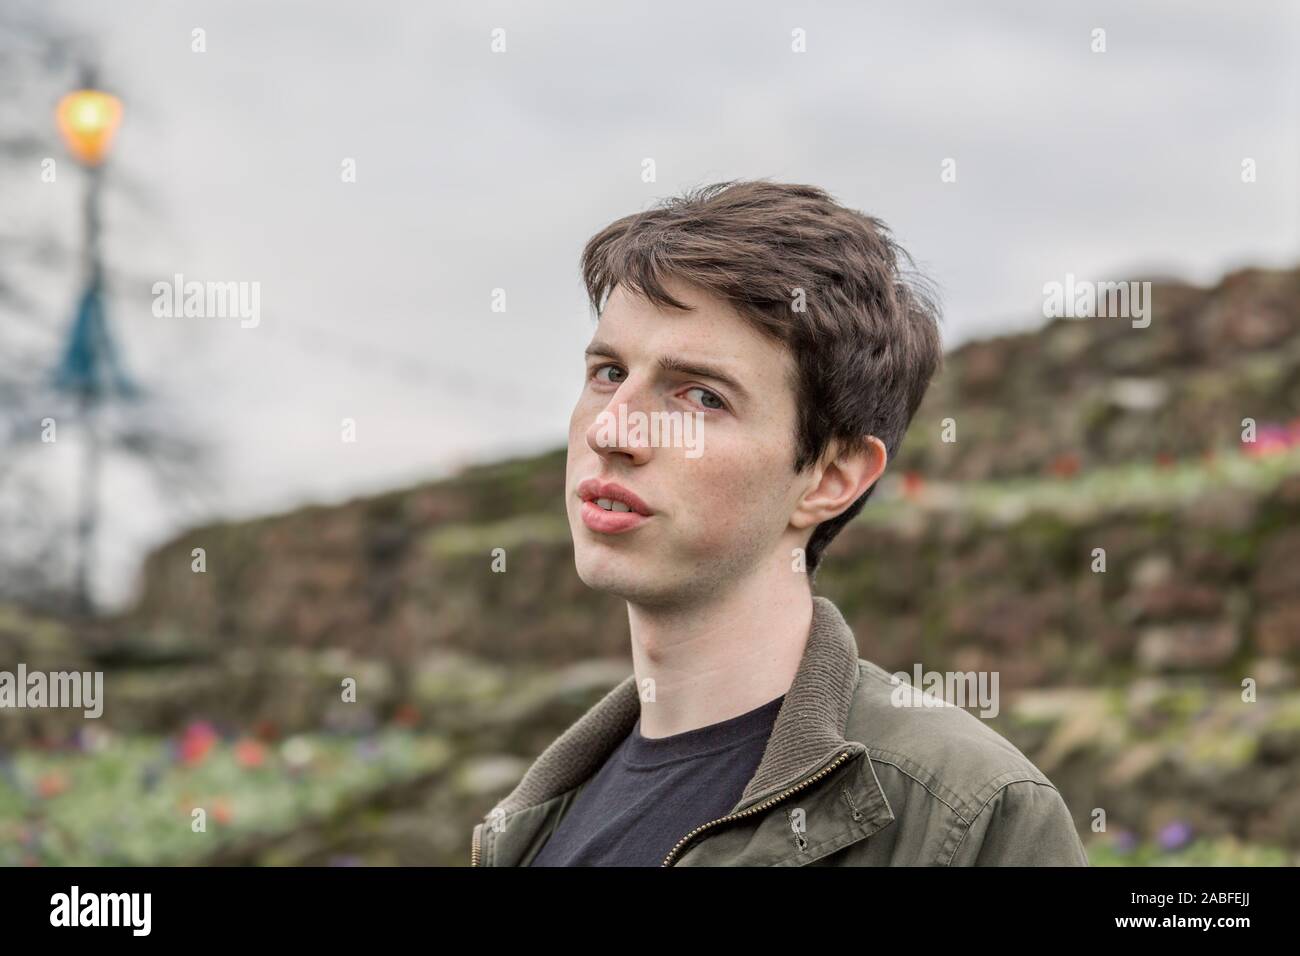 A young man in his late teens or early twenties looks questioningly at the camera as though sceptical. Stock Photo